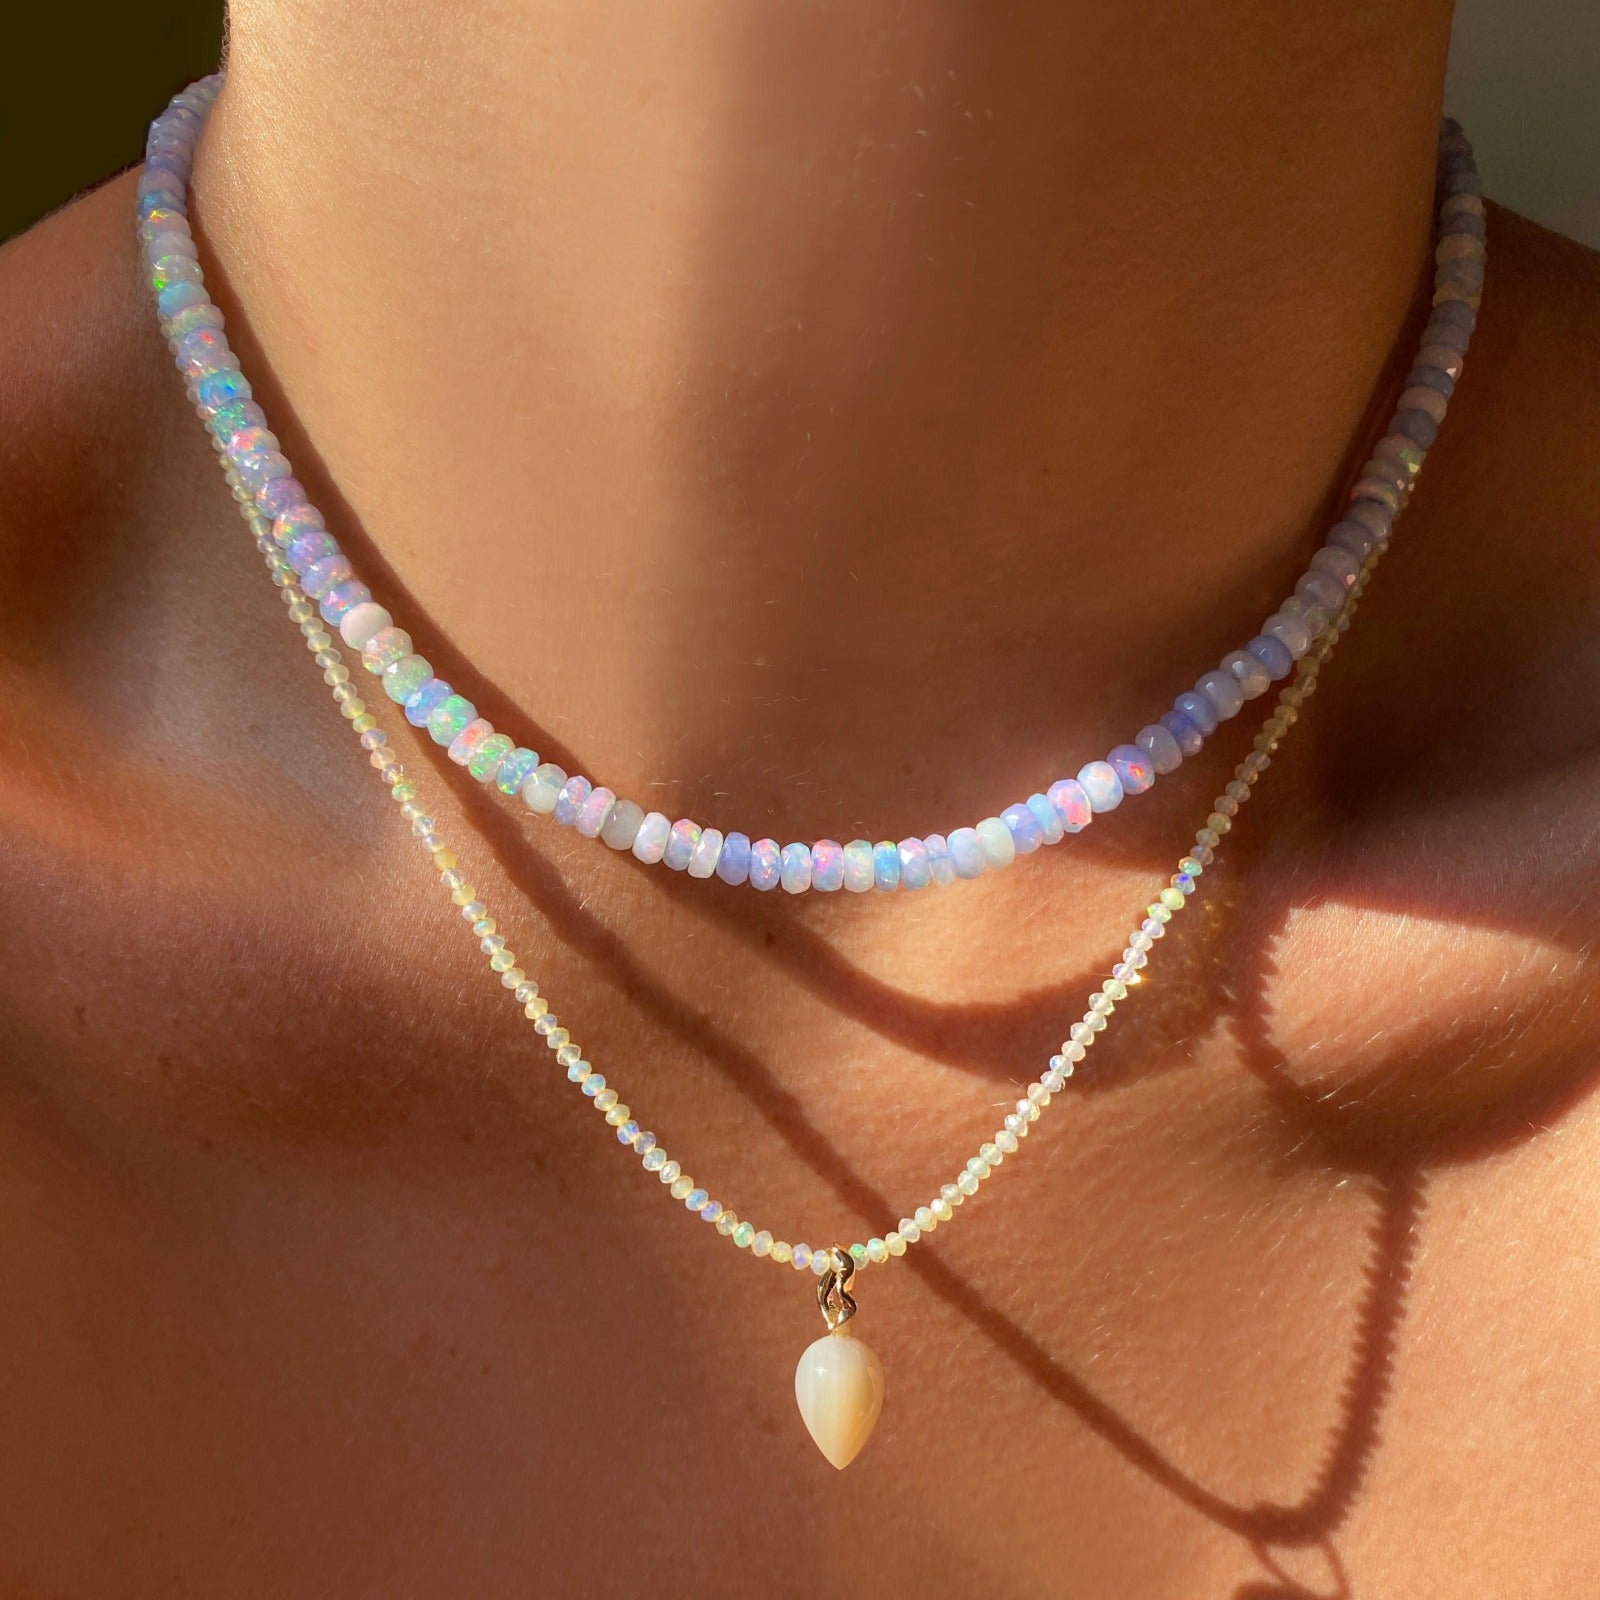 Shimmering beaded necklace made of faceted opals in shades of light pastel blue and white on a gold linking ovals clasp. Styled on a neck layered with an acorn drop charm.